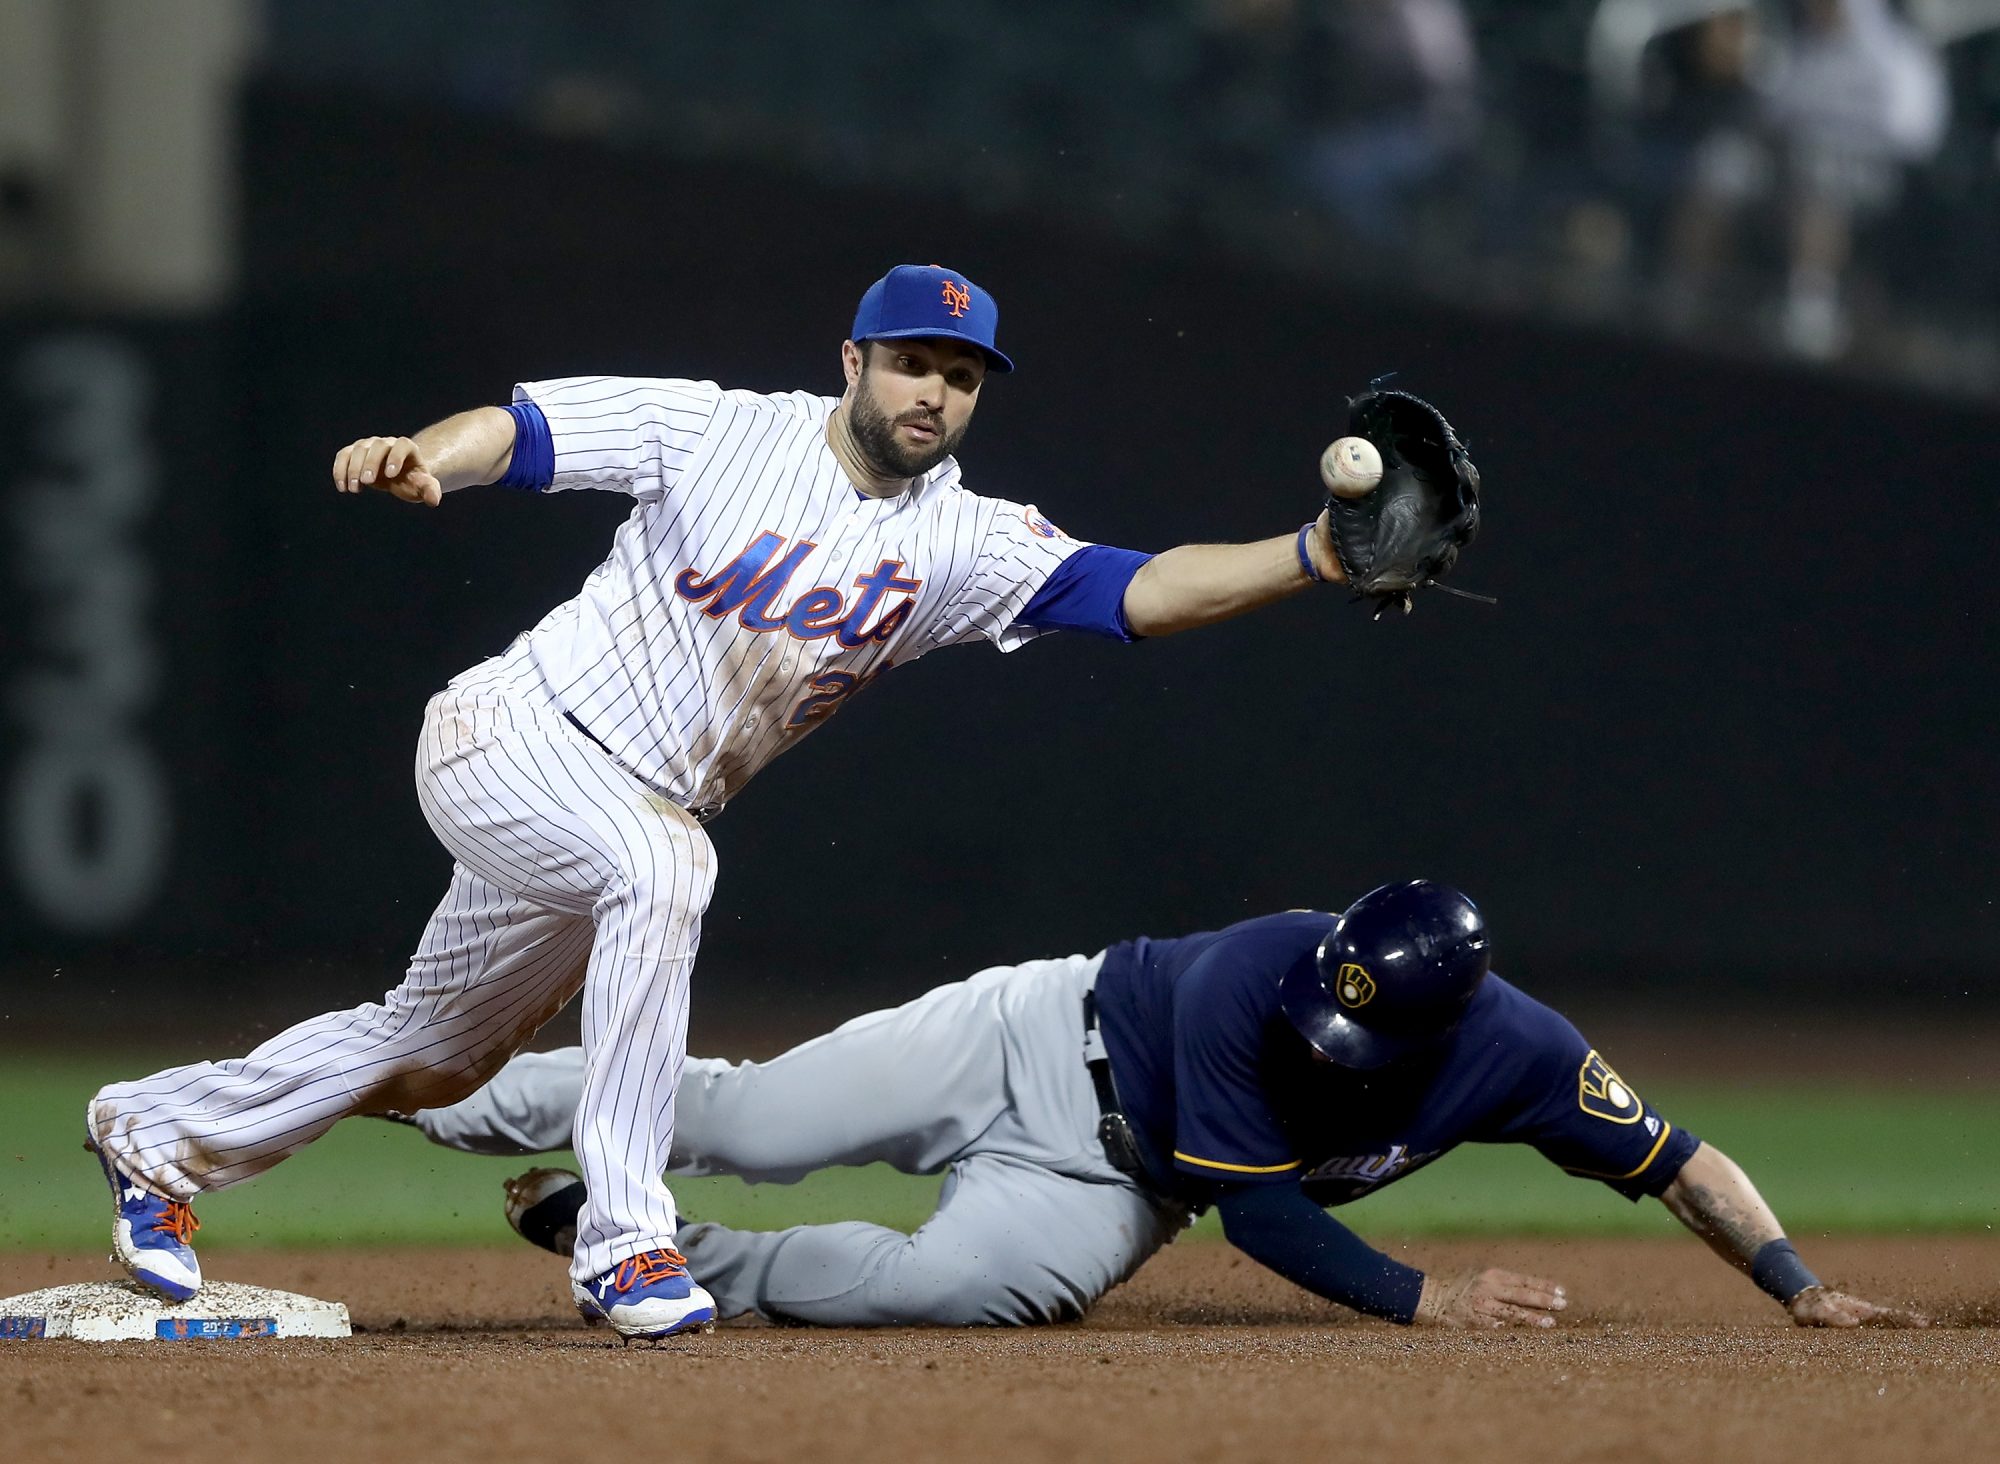 New York Mets: Neil Walker, Not Dominic Smith, Will Play First Base Tuesday Night 1